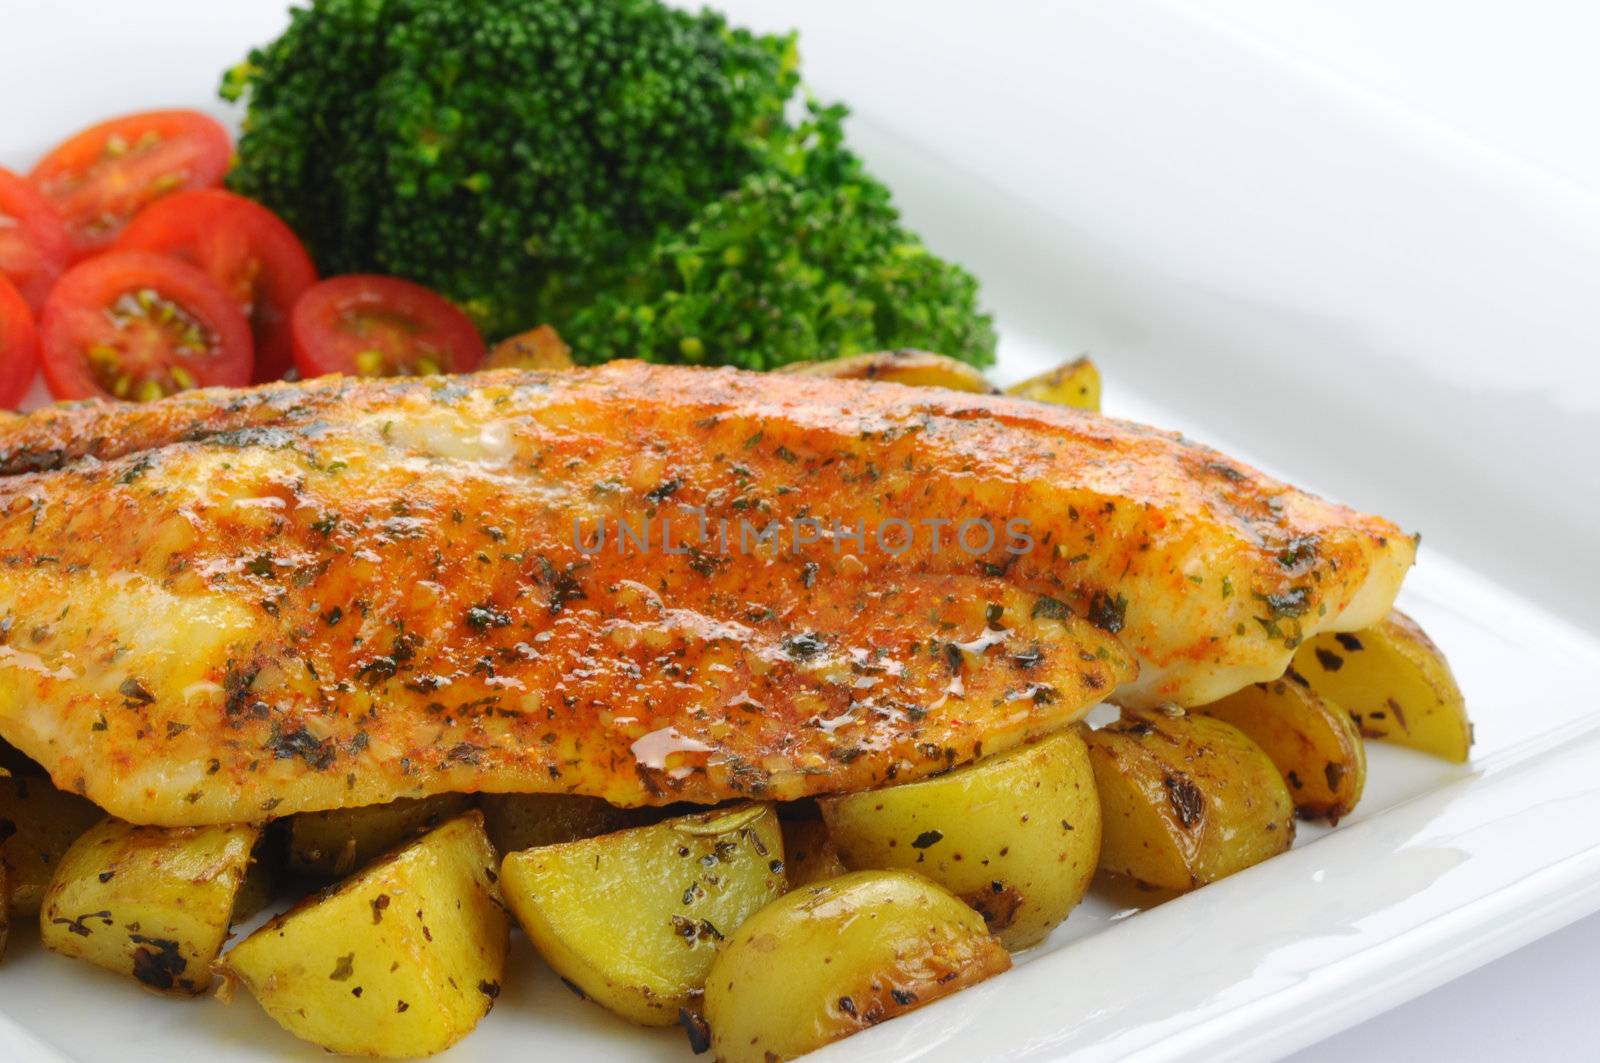 Delicious broiled tilapia served with fresh vegetables.